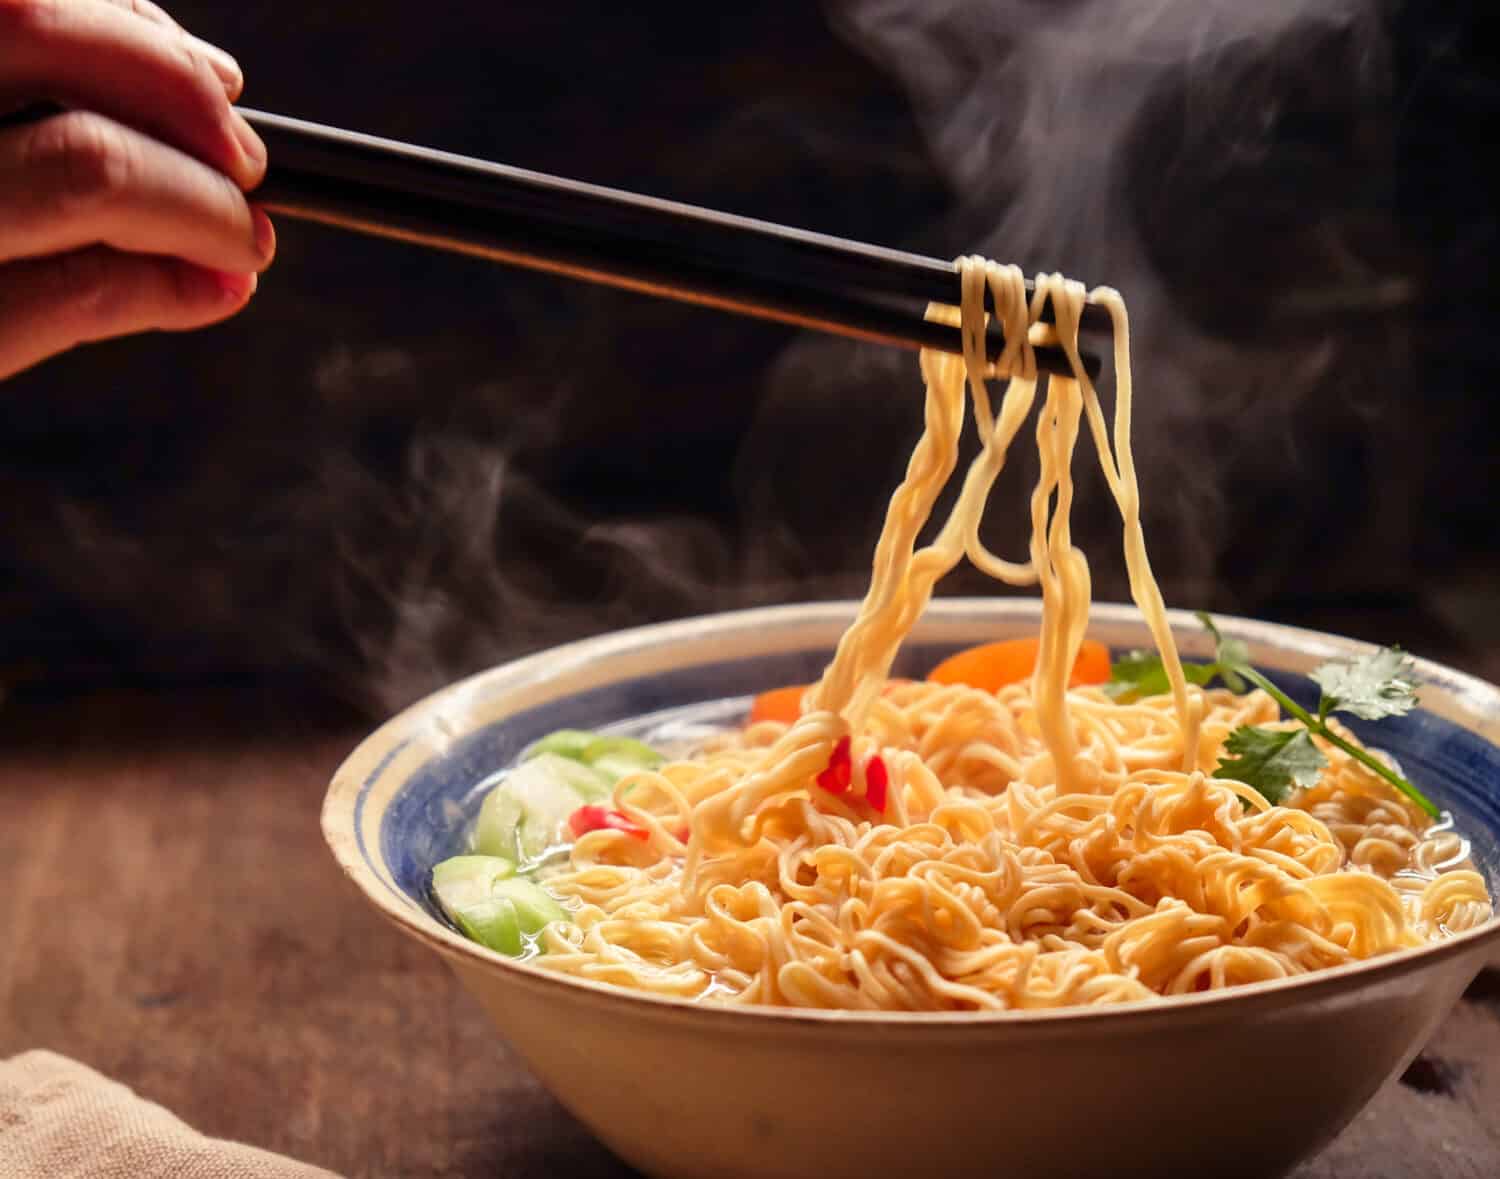 Hand uses chopsticks to pickup tasty noodles with smokes.